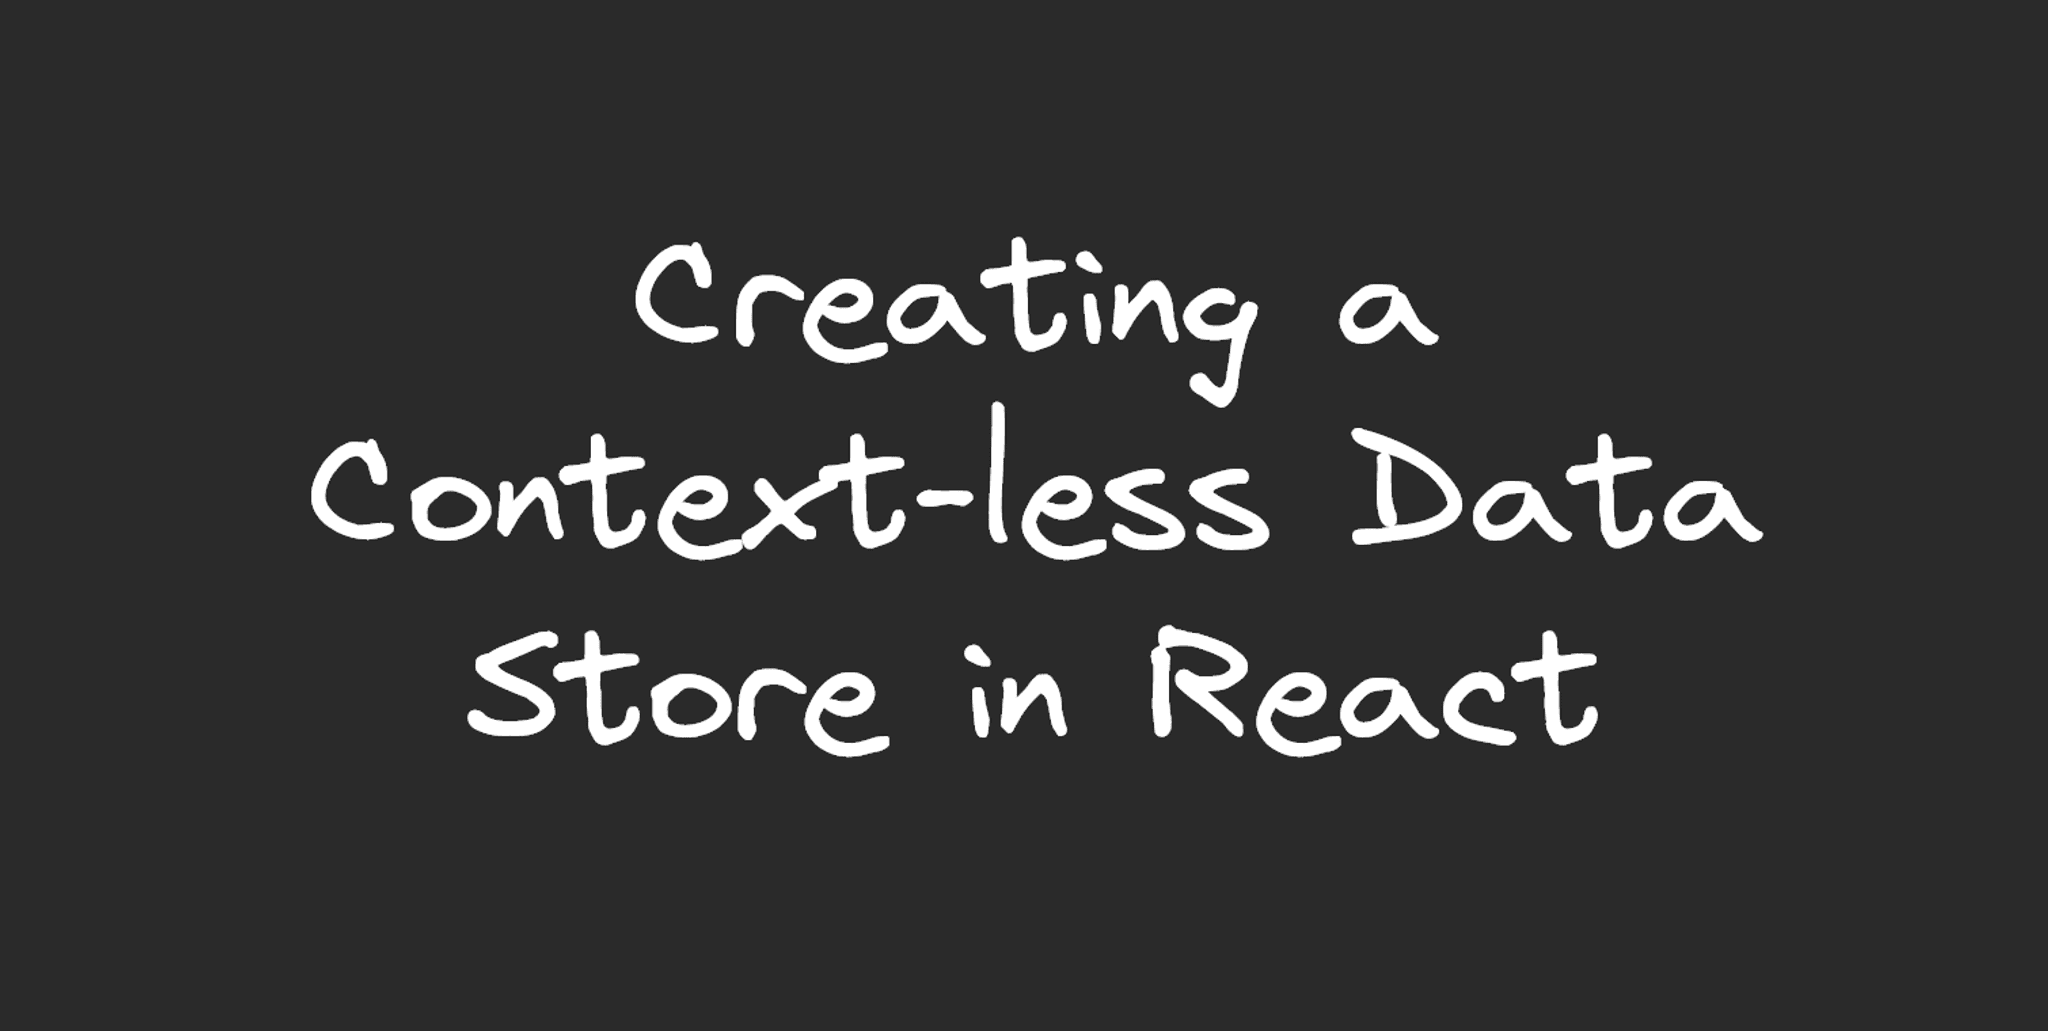 An image with the text "Creating a Context-less Data Store in React" at the center.